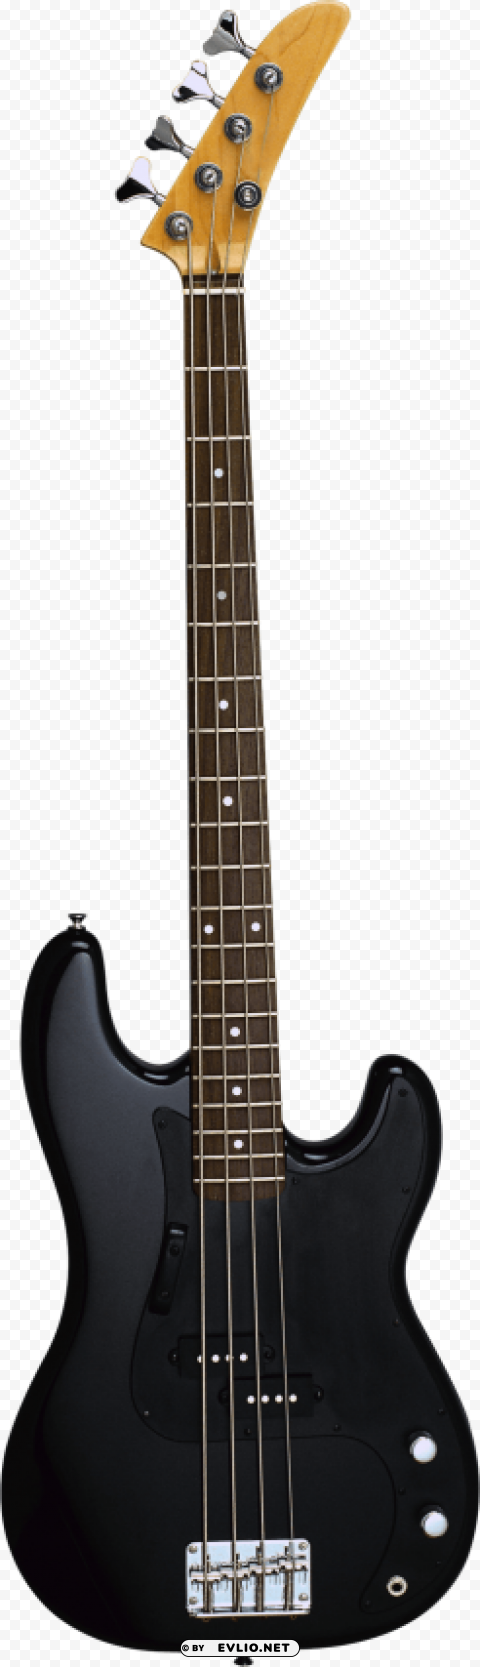 electric guitar black Isolated Item in HighQuality Transparent PNG